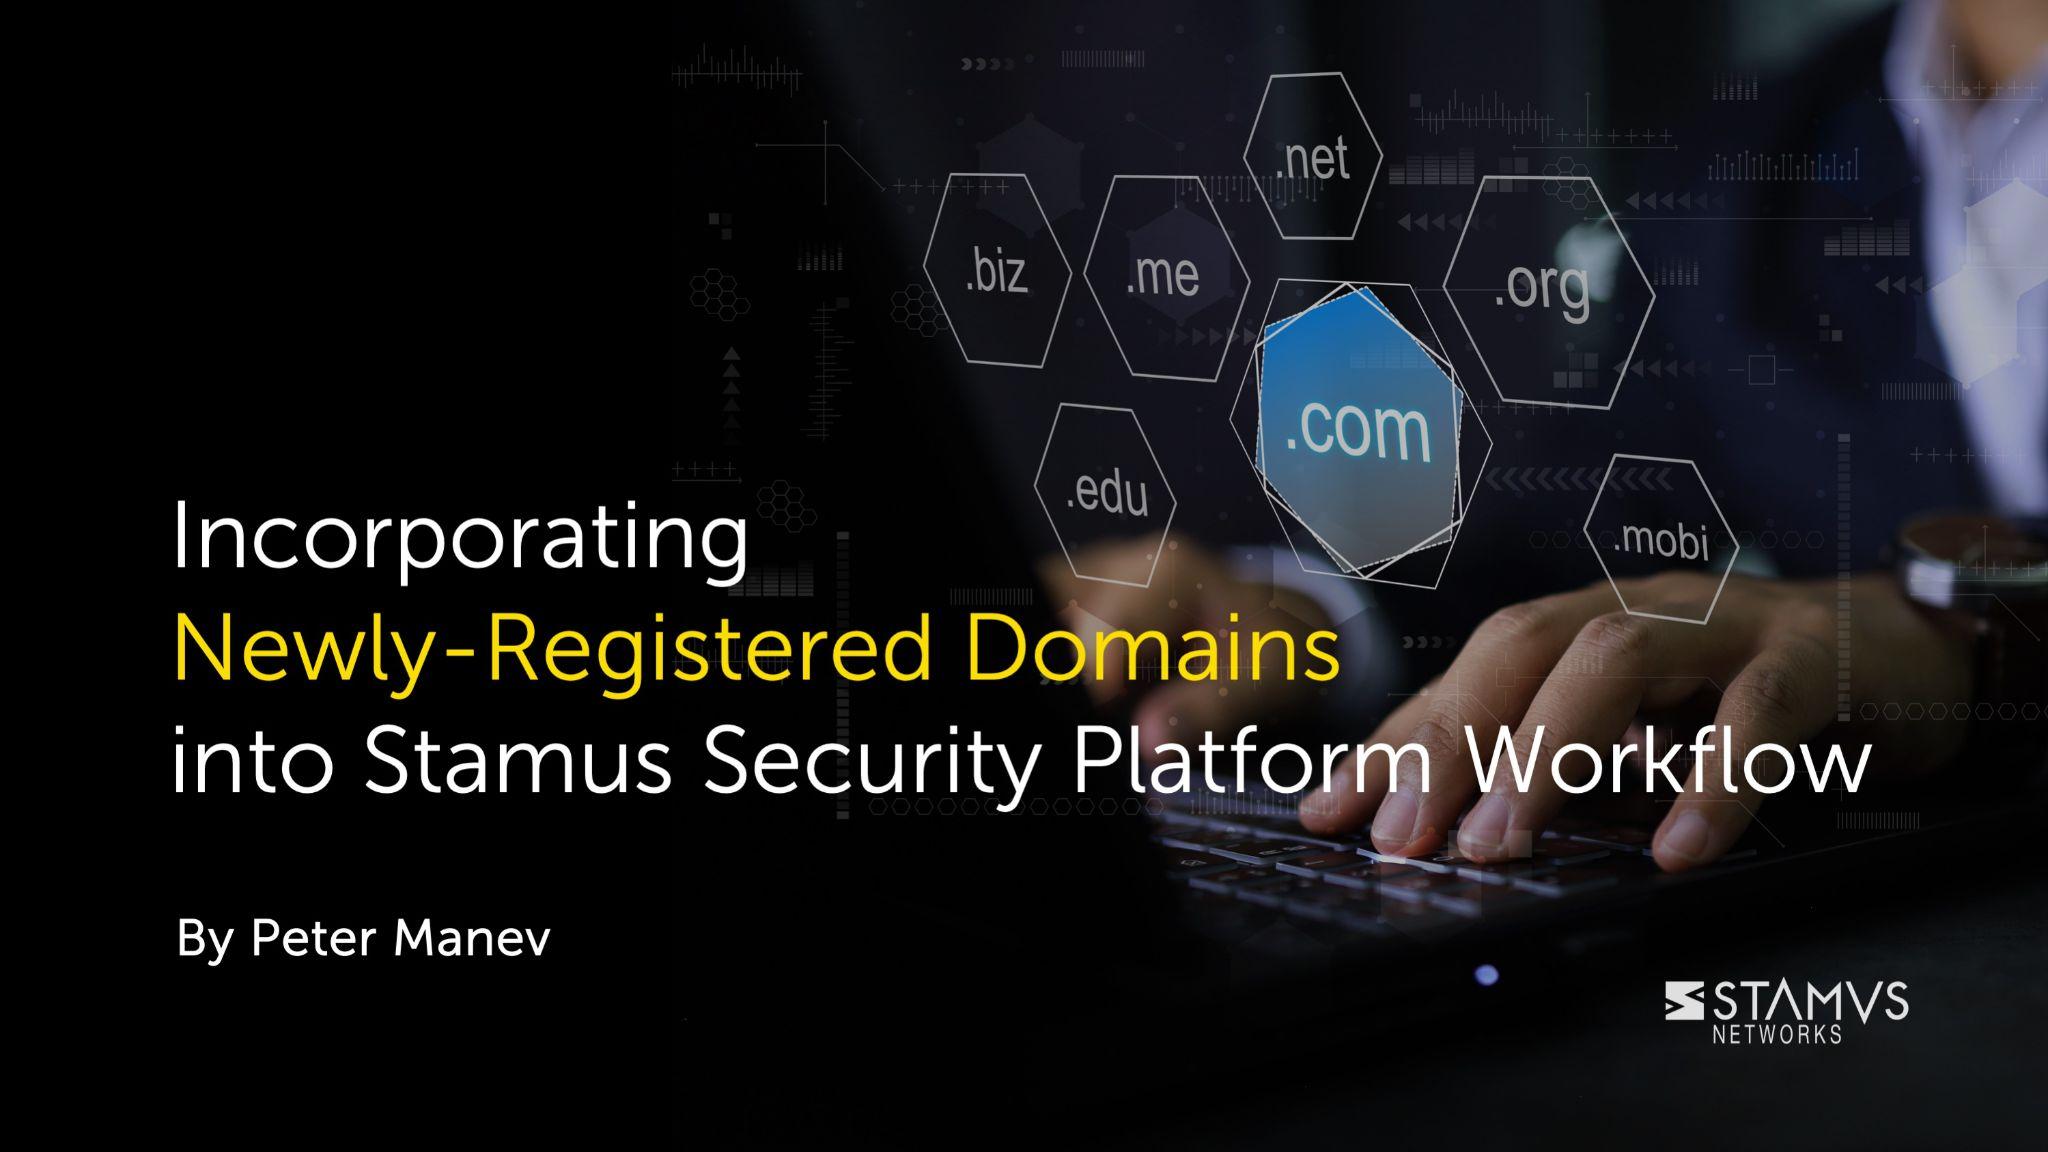 Incorporating Newley-Registered Domains into Stamus Security Platform Workflow by Peter Manev